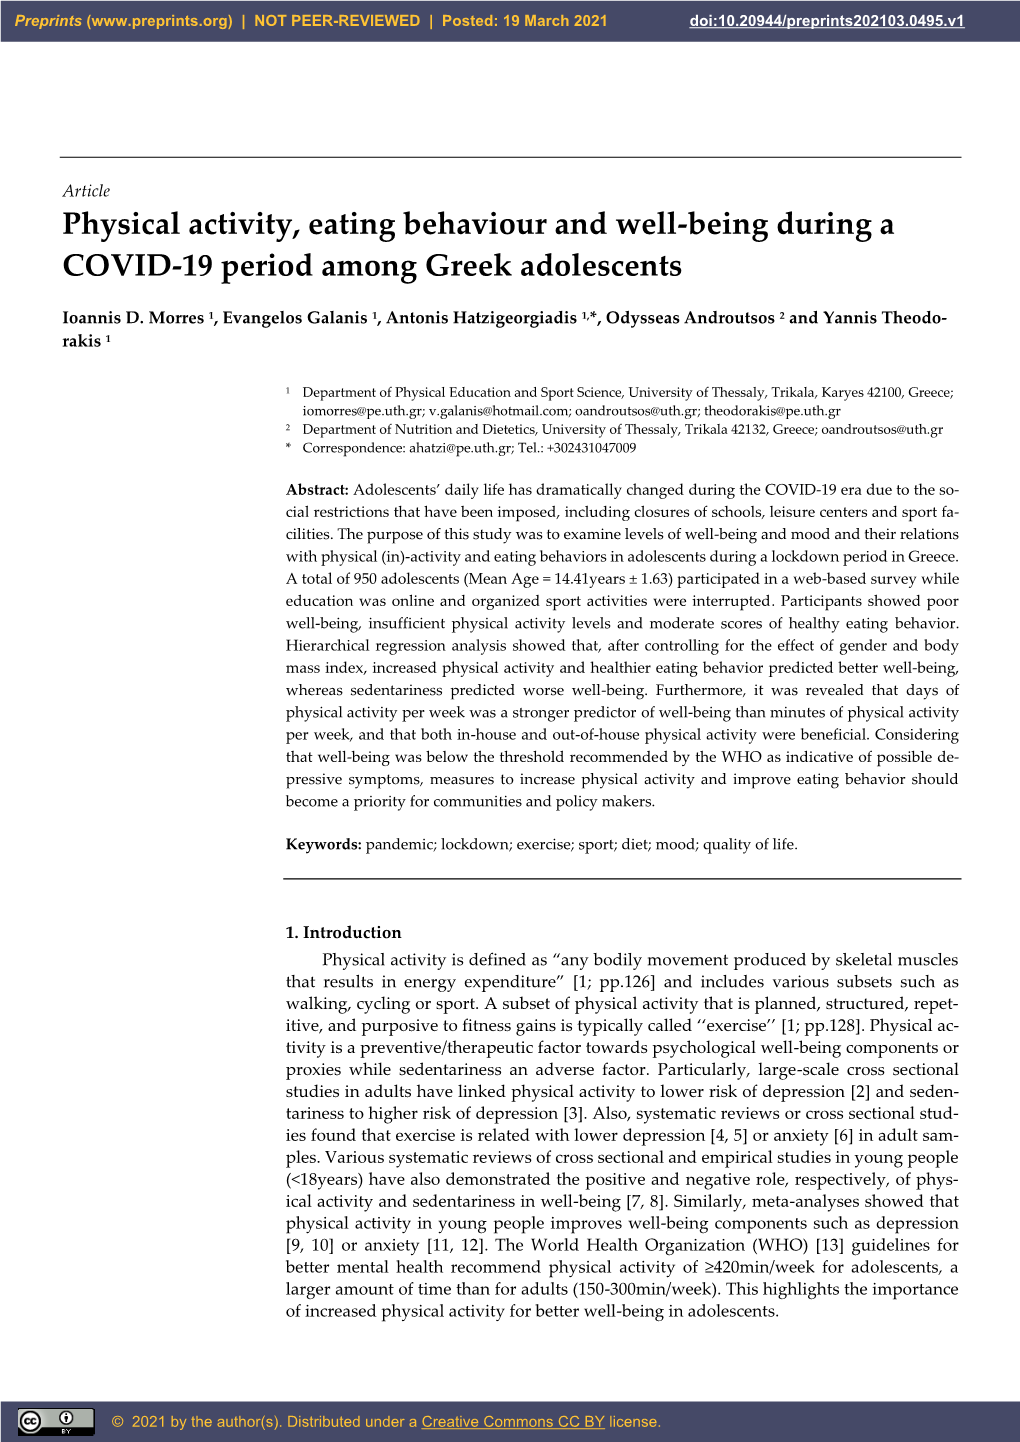 Physical Activity, Eating Behaviour and Well-Being During a COVID-19 Period Among Greek Adolescents